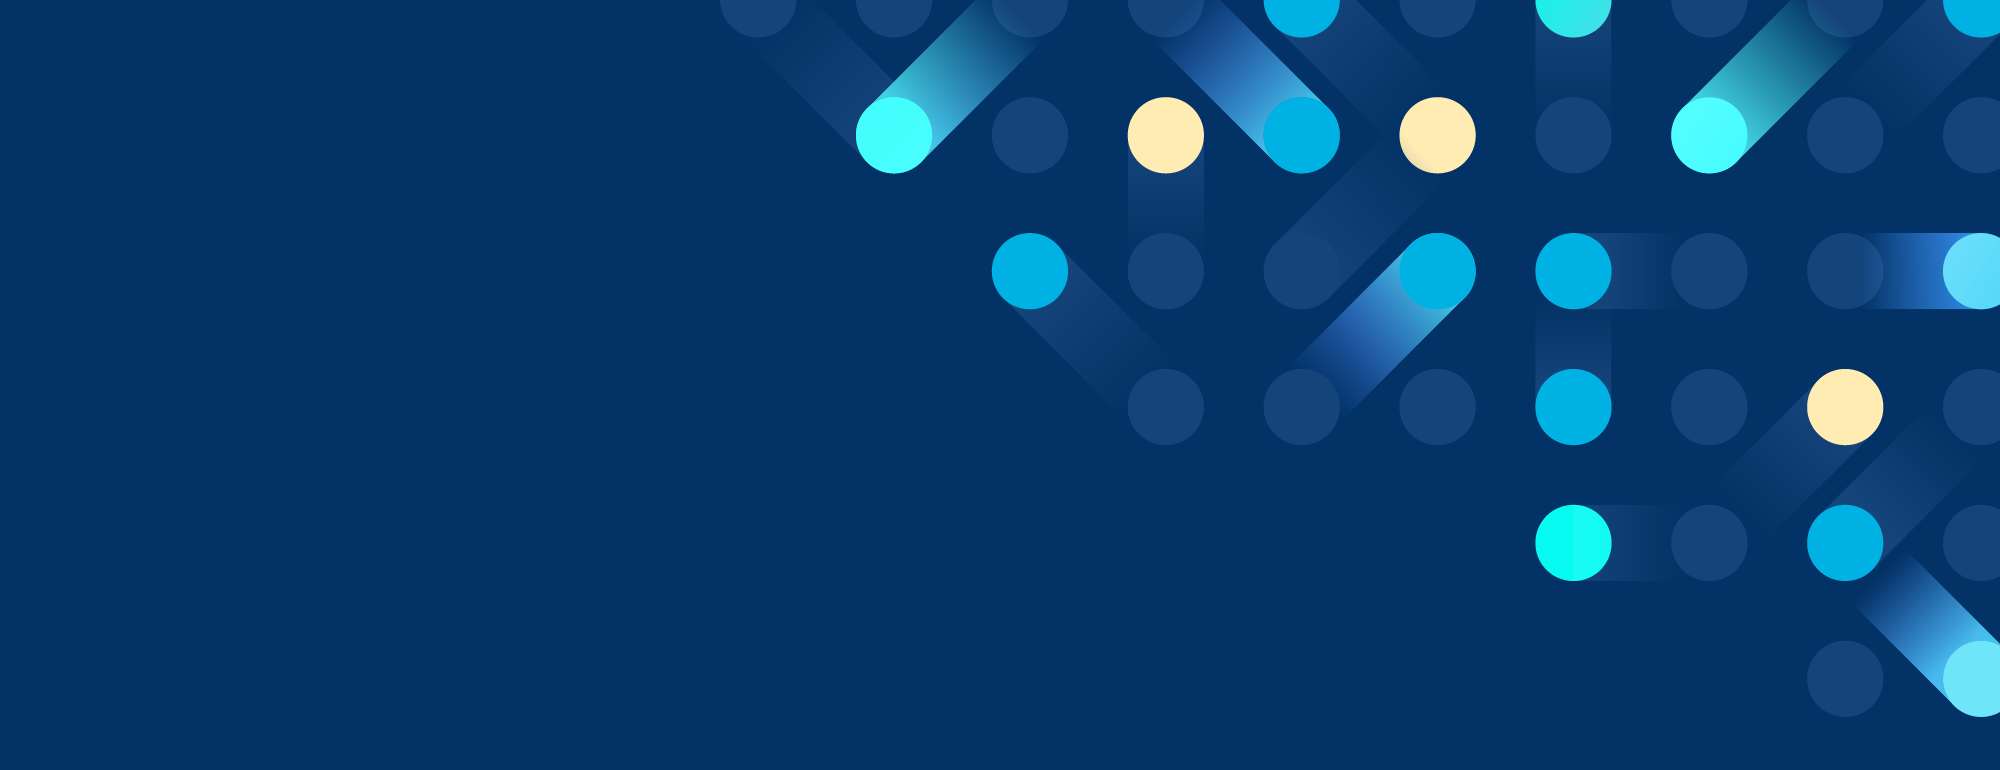 dark blue background with multi-colored blue and gold dots flying from top right corner